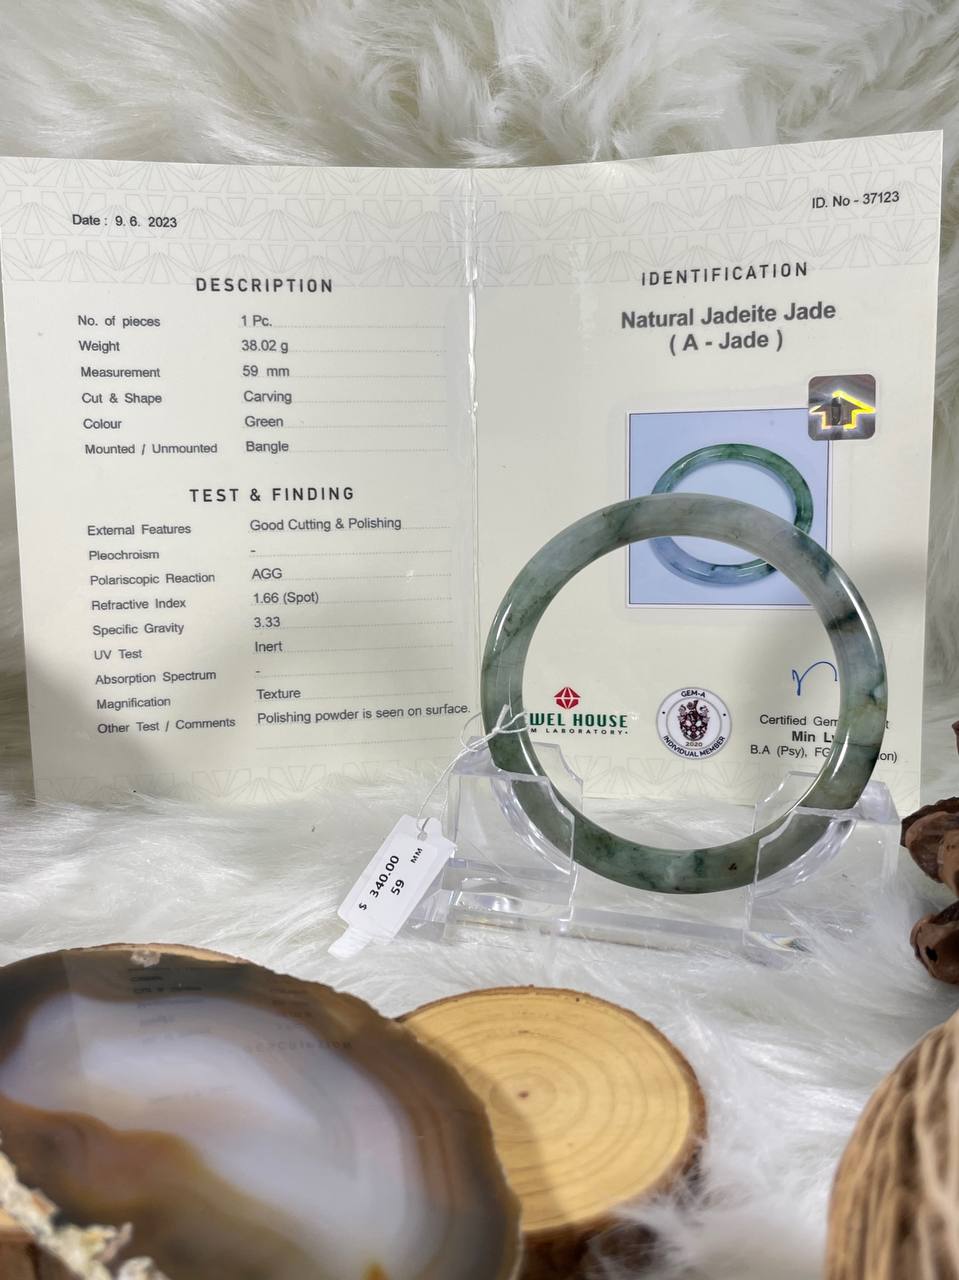 Grade A Natural Jade Bangle with certificate #37021